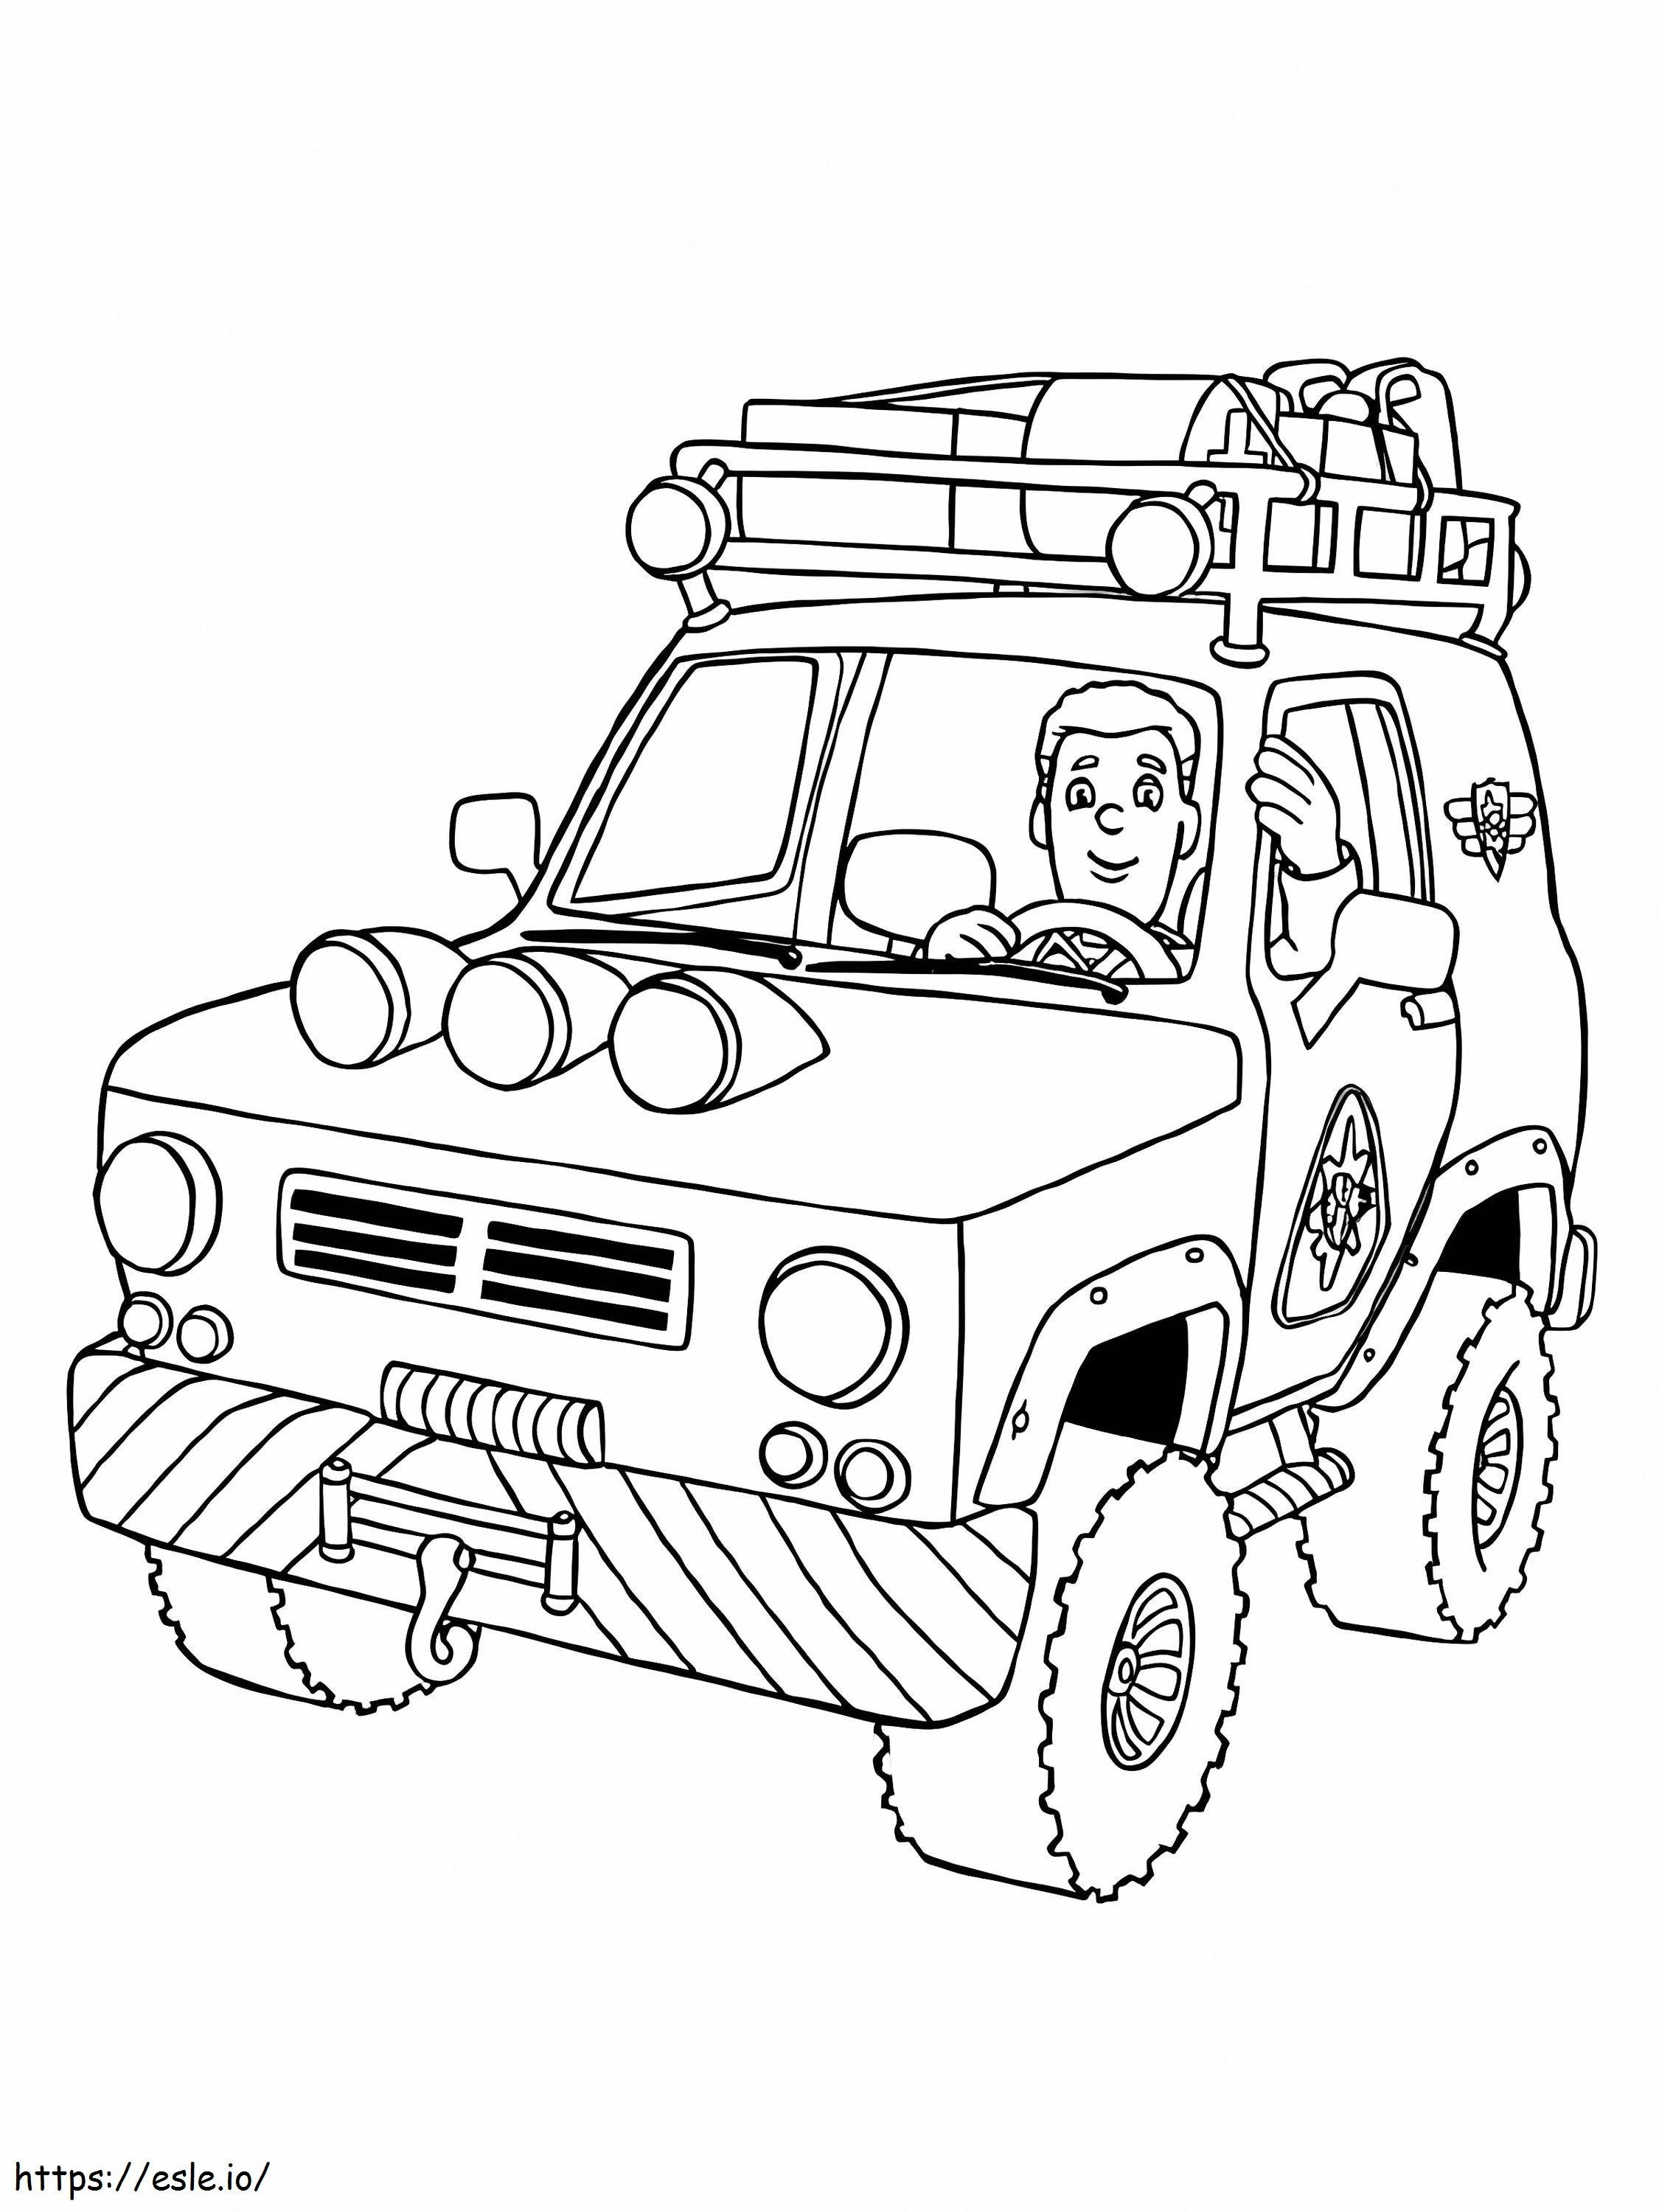 Ben Hopper In Car coloring page